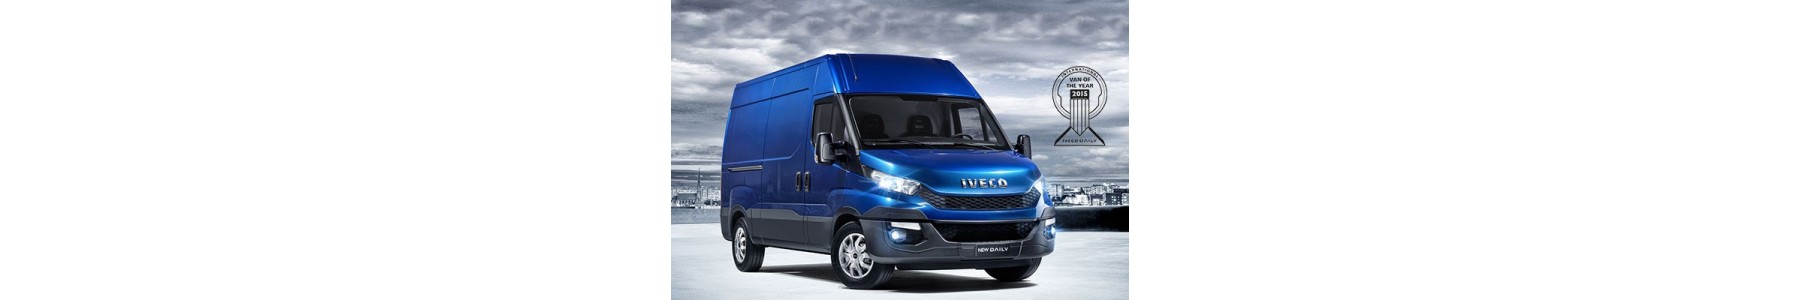 22H22 - Equipement / Accessoires / Tuning IVECO DAILY 2015 - 2019